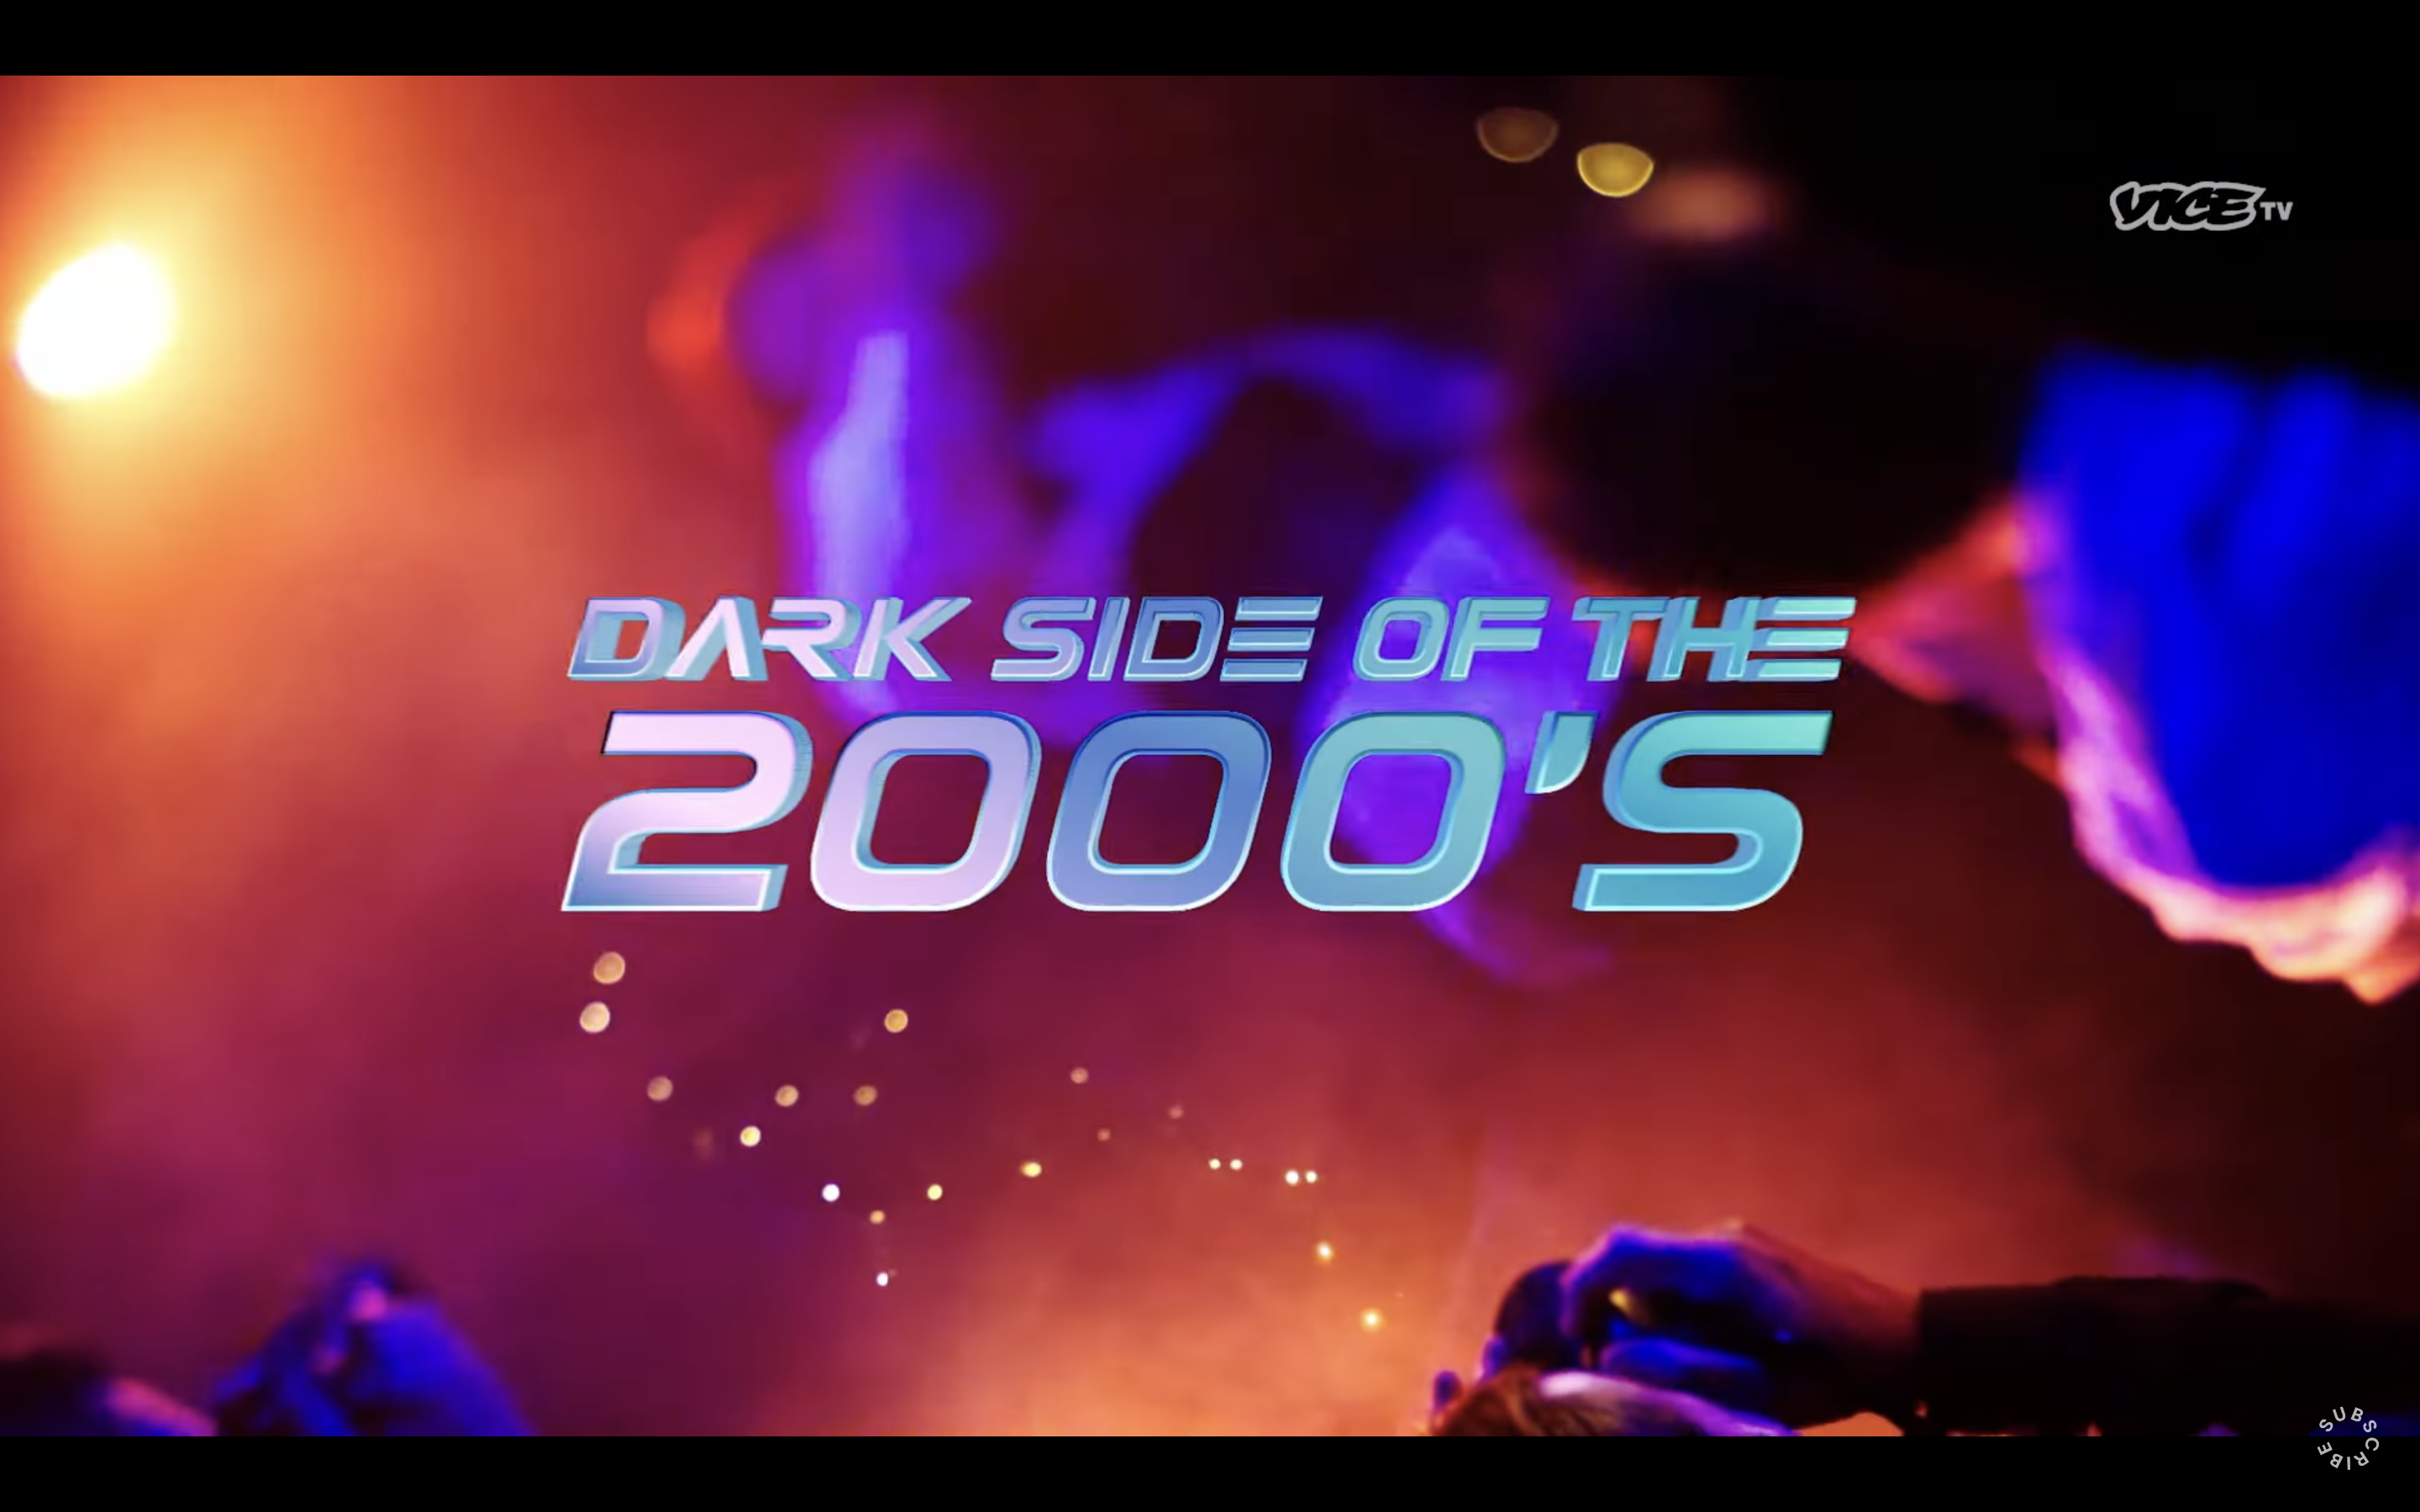 How to watch Vice TVs new miniseries Dark Side of the 2000′s Time, channel, free live stream